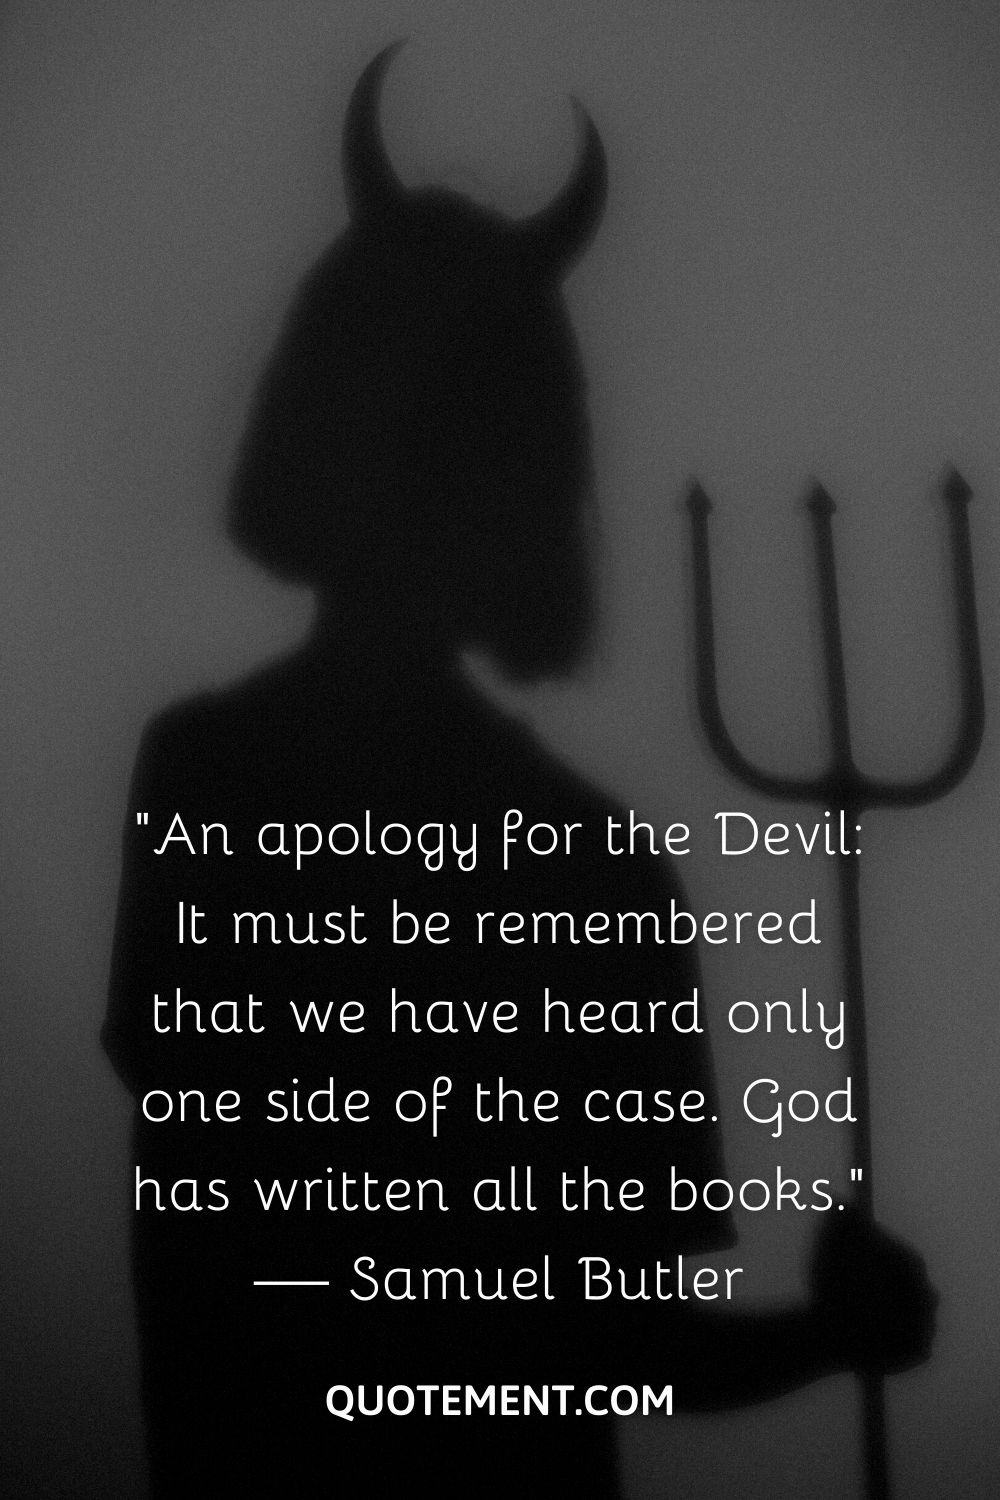 “An apology for the Devil It must be remembered that we have heard only one side of the case. God has written all the books.” — Samuel Butler